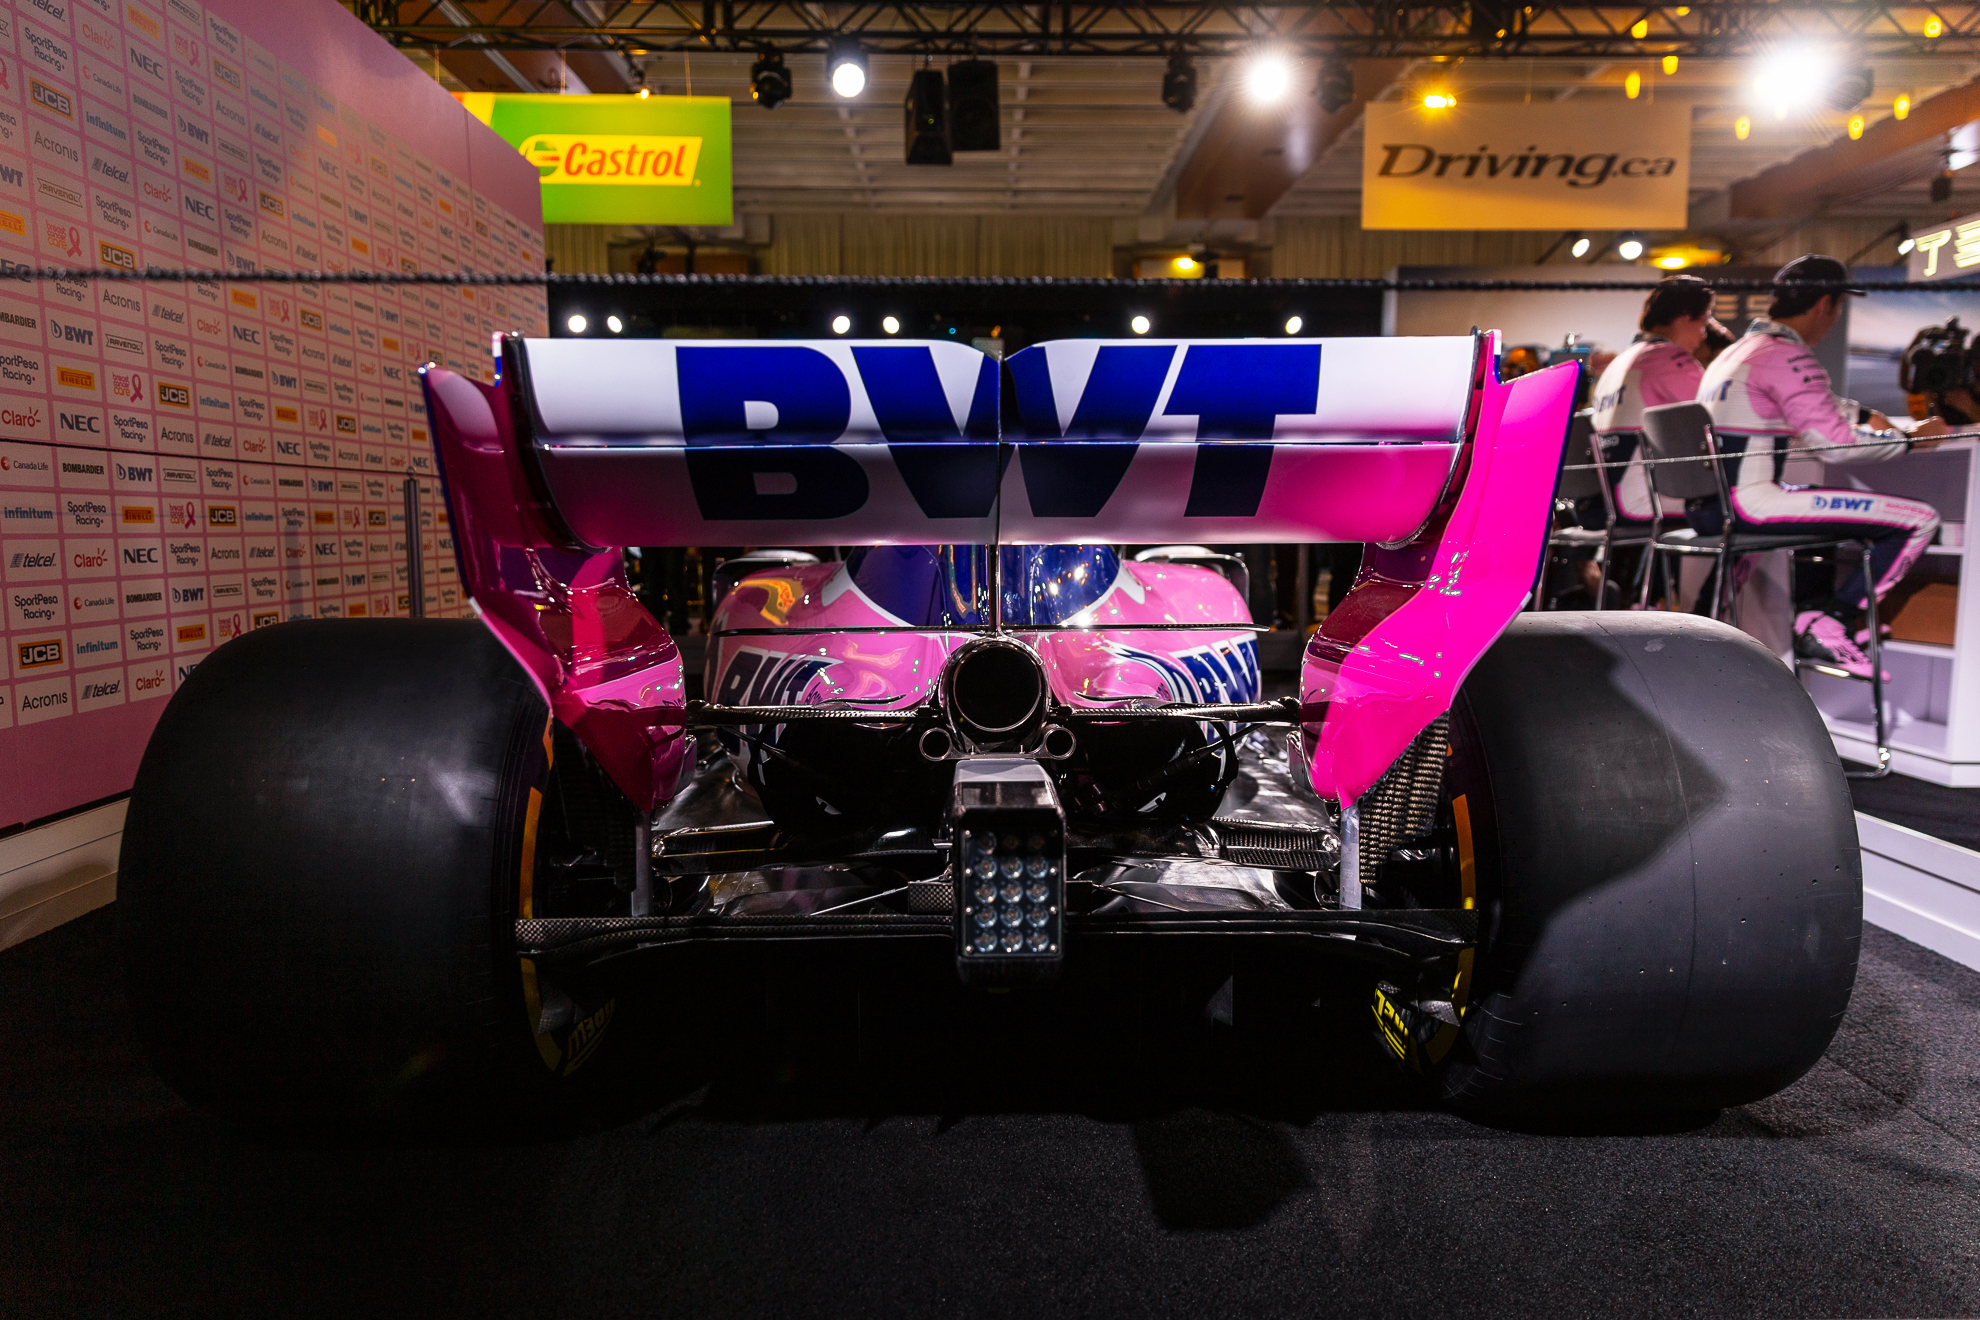  Toronto, Canada 13 Feb, 2019. SportPesa Racing Point F1 Team launch their 2019 car and livery at the John Bassett Theatre in Toronto, Canada. Credit: Gary Hebding Jr/Alamy Live News 